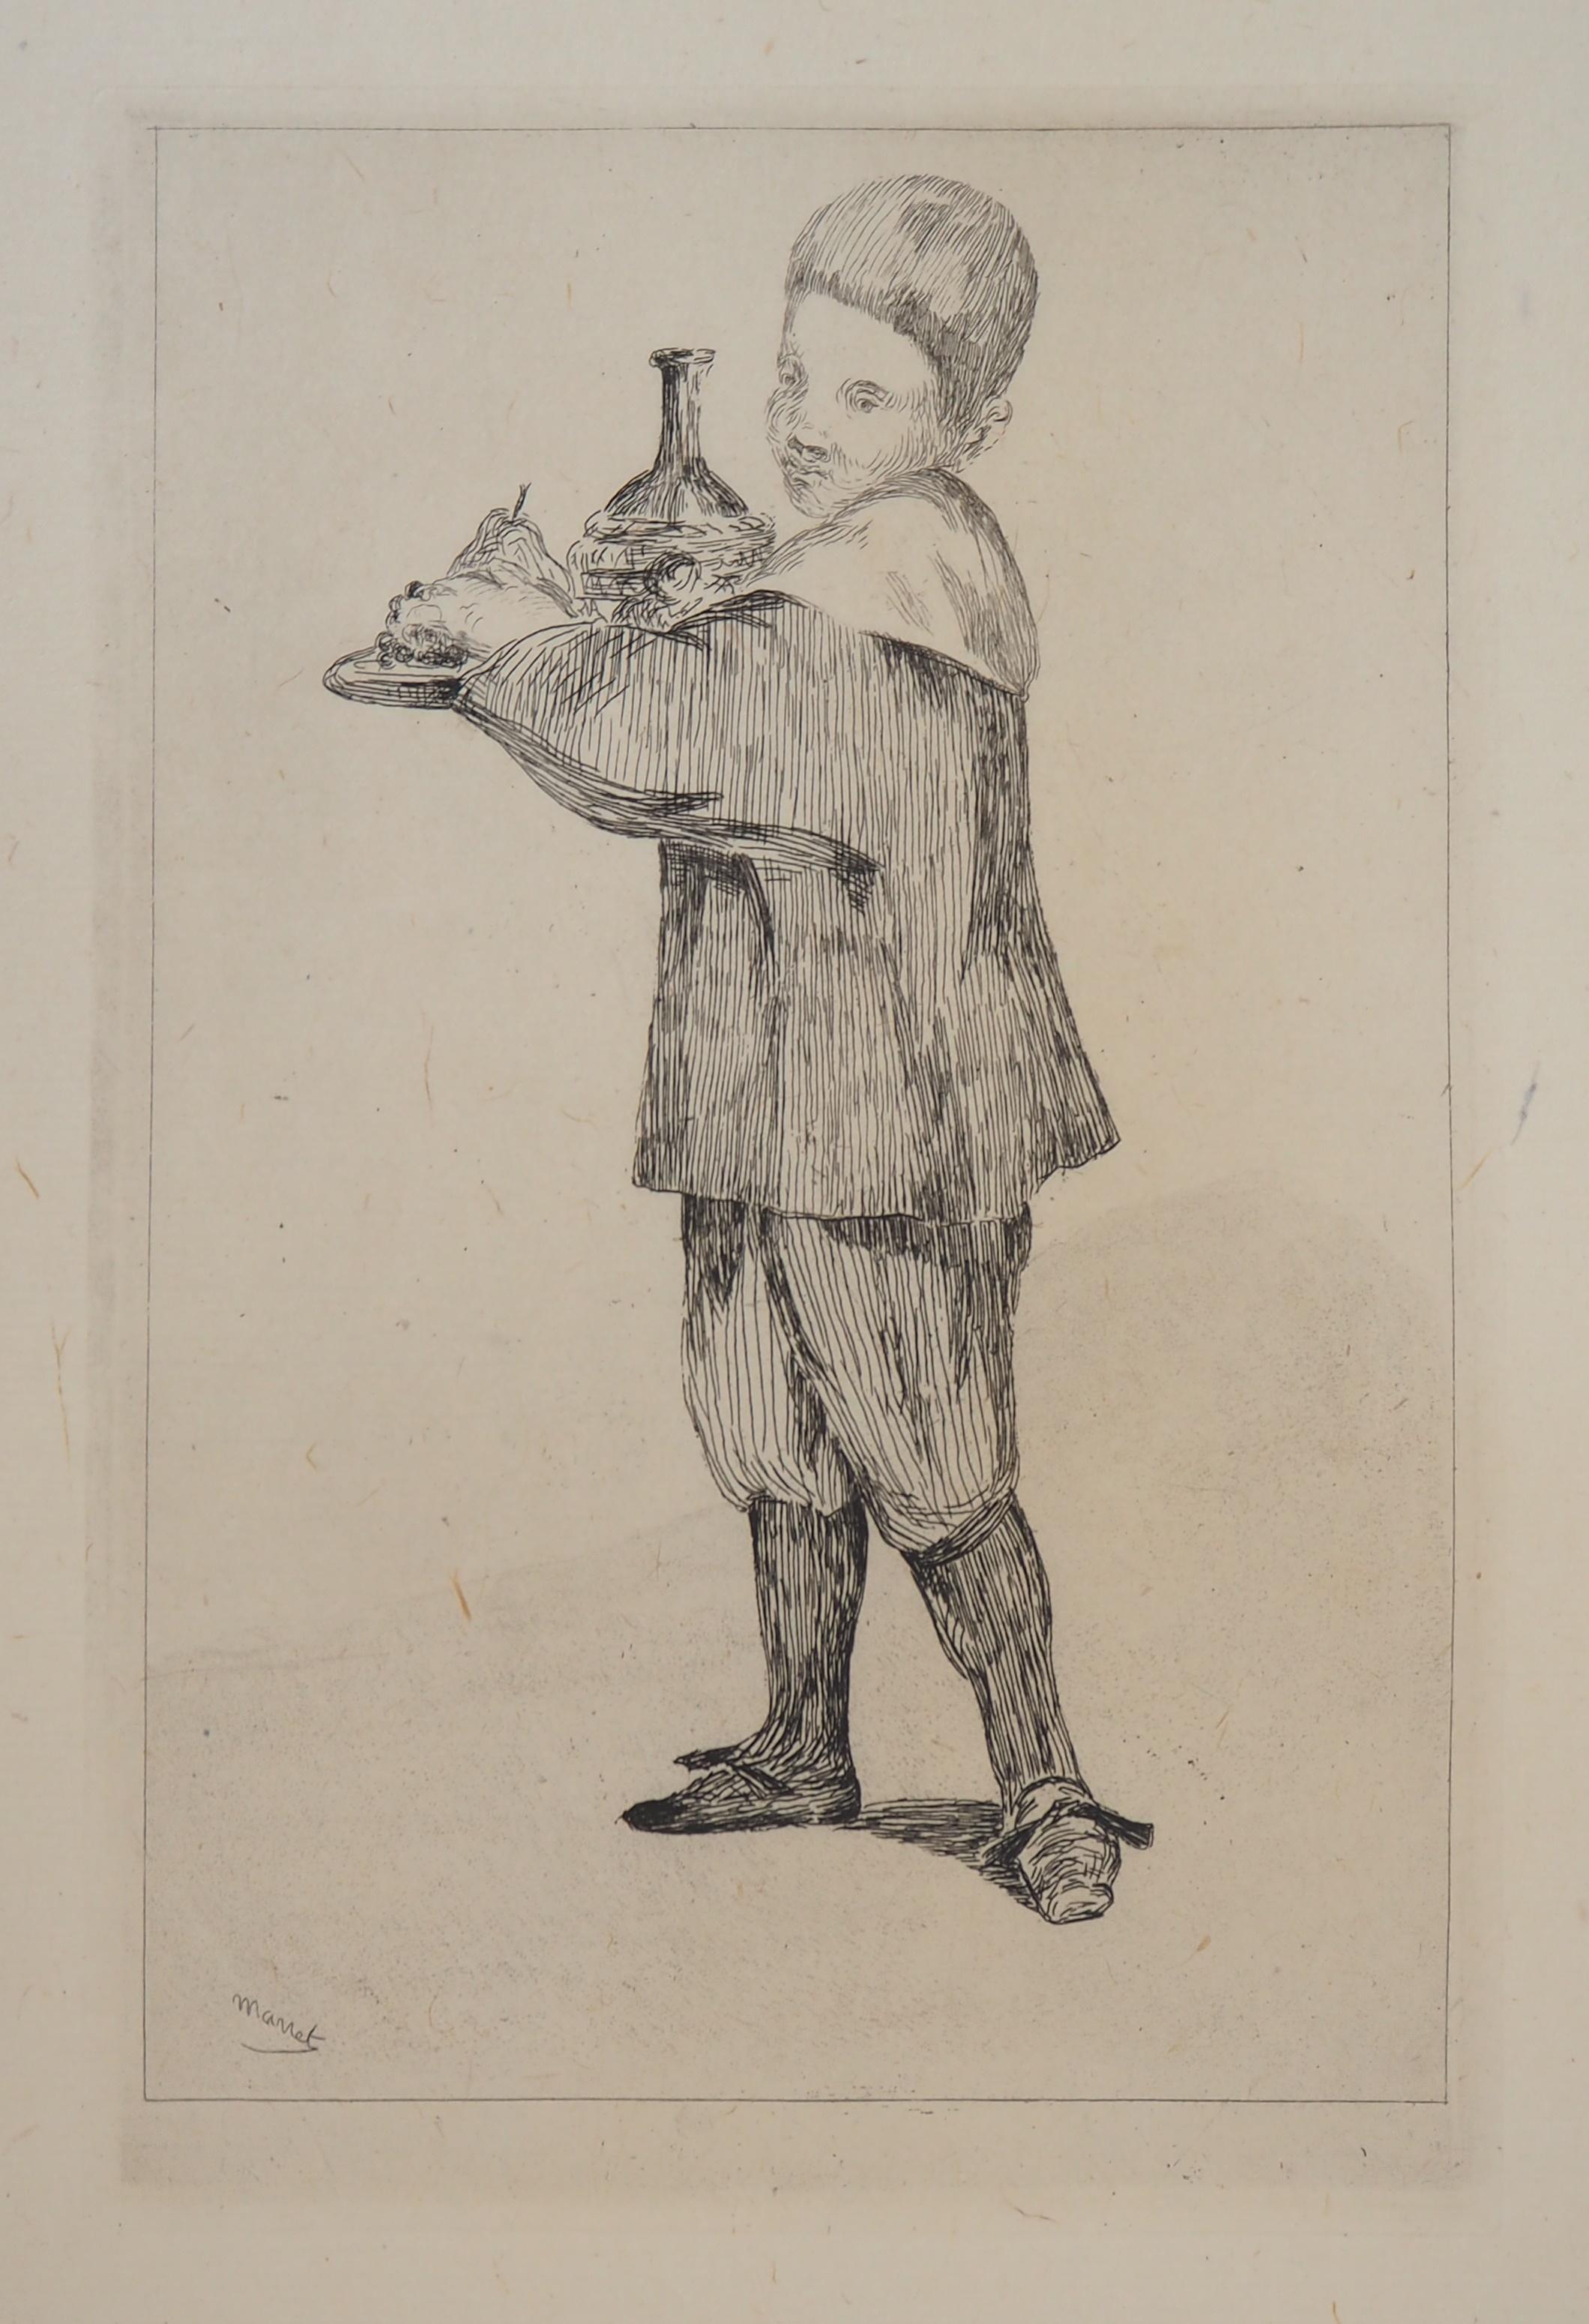 Child with a Tray (Pear and Bottle) - Original Etching (Guerin #15)